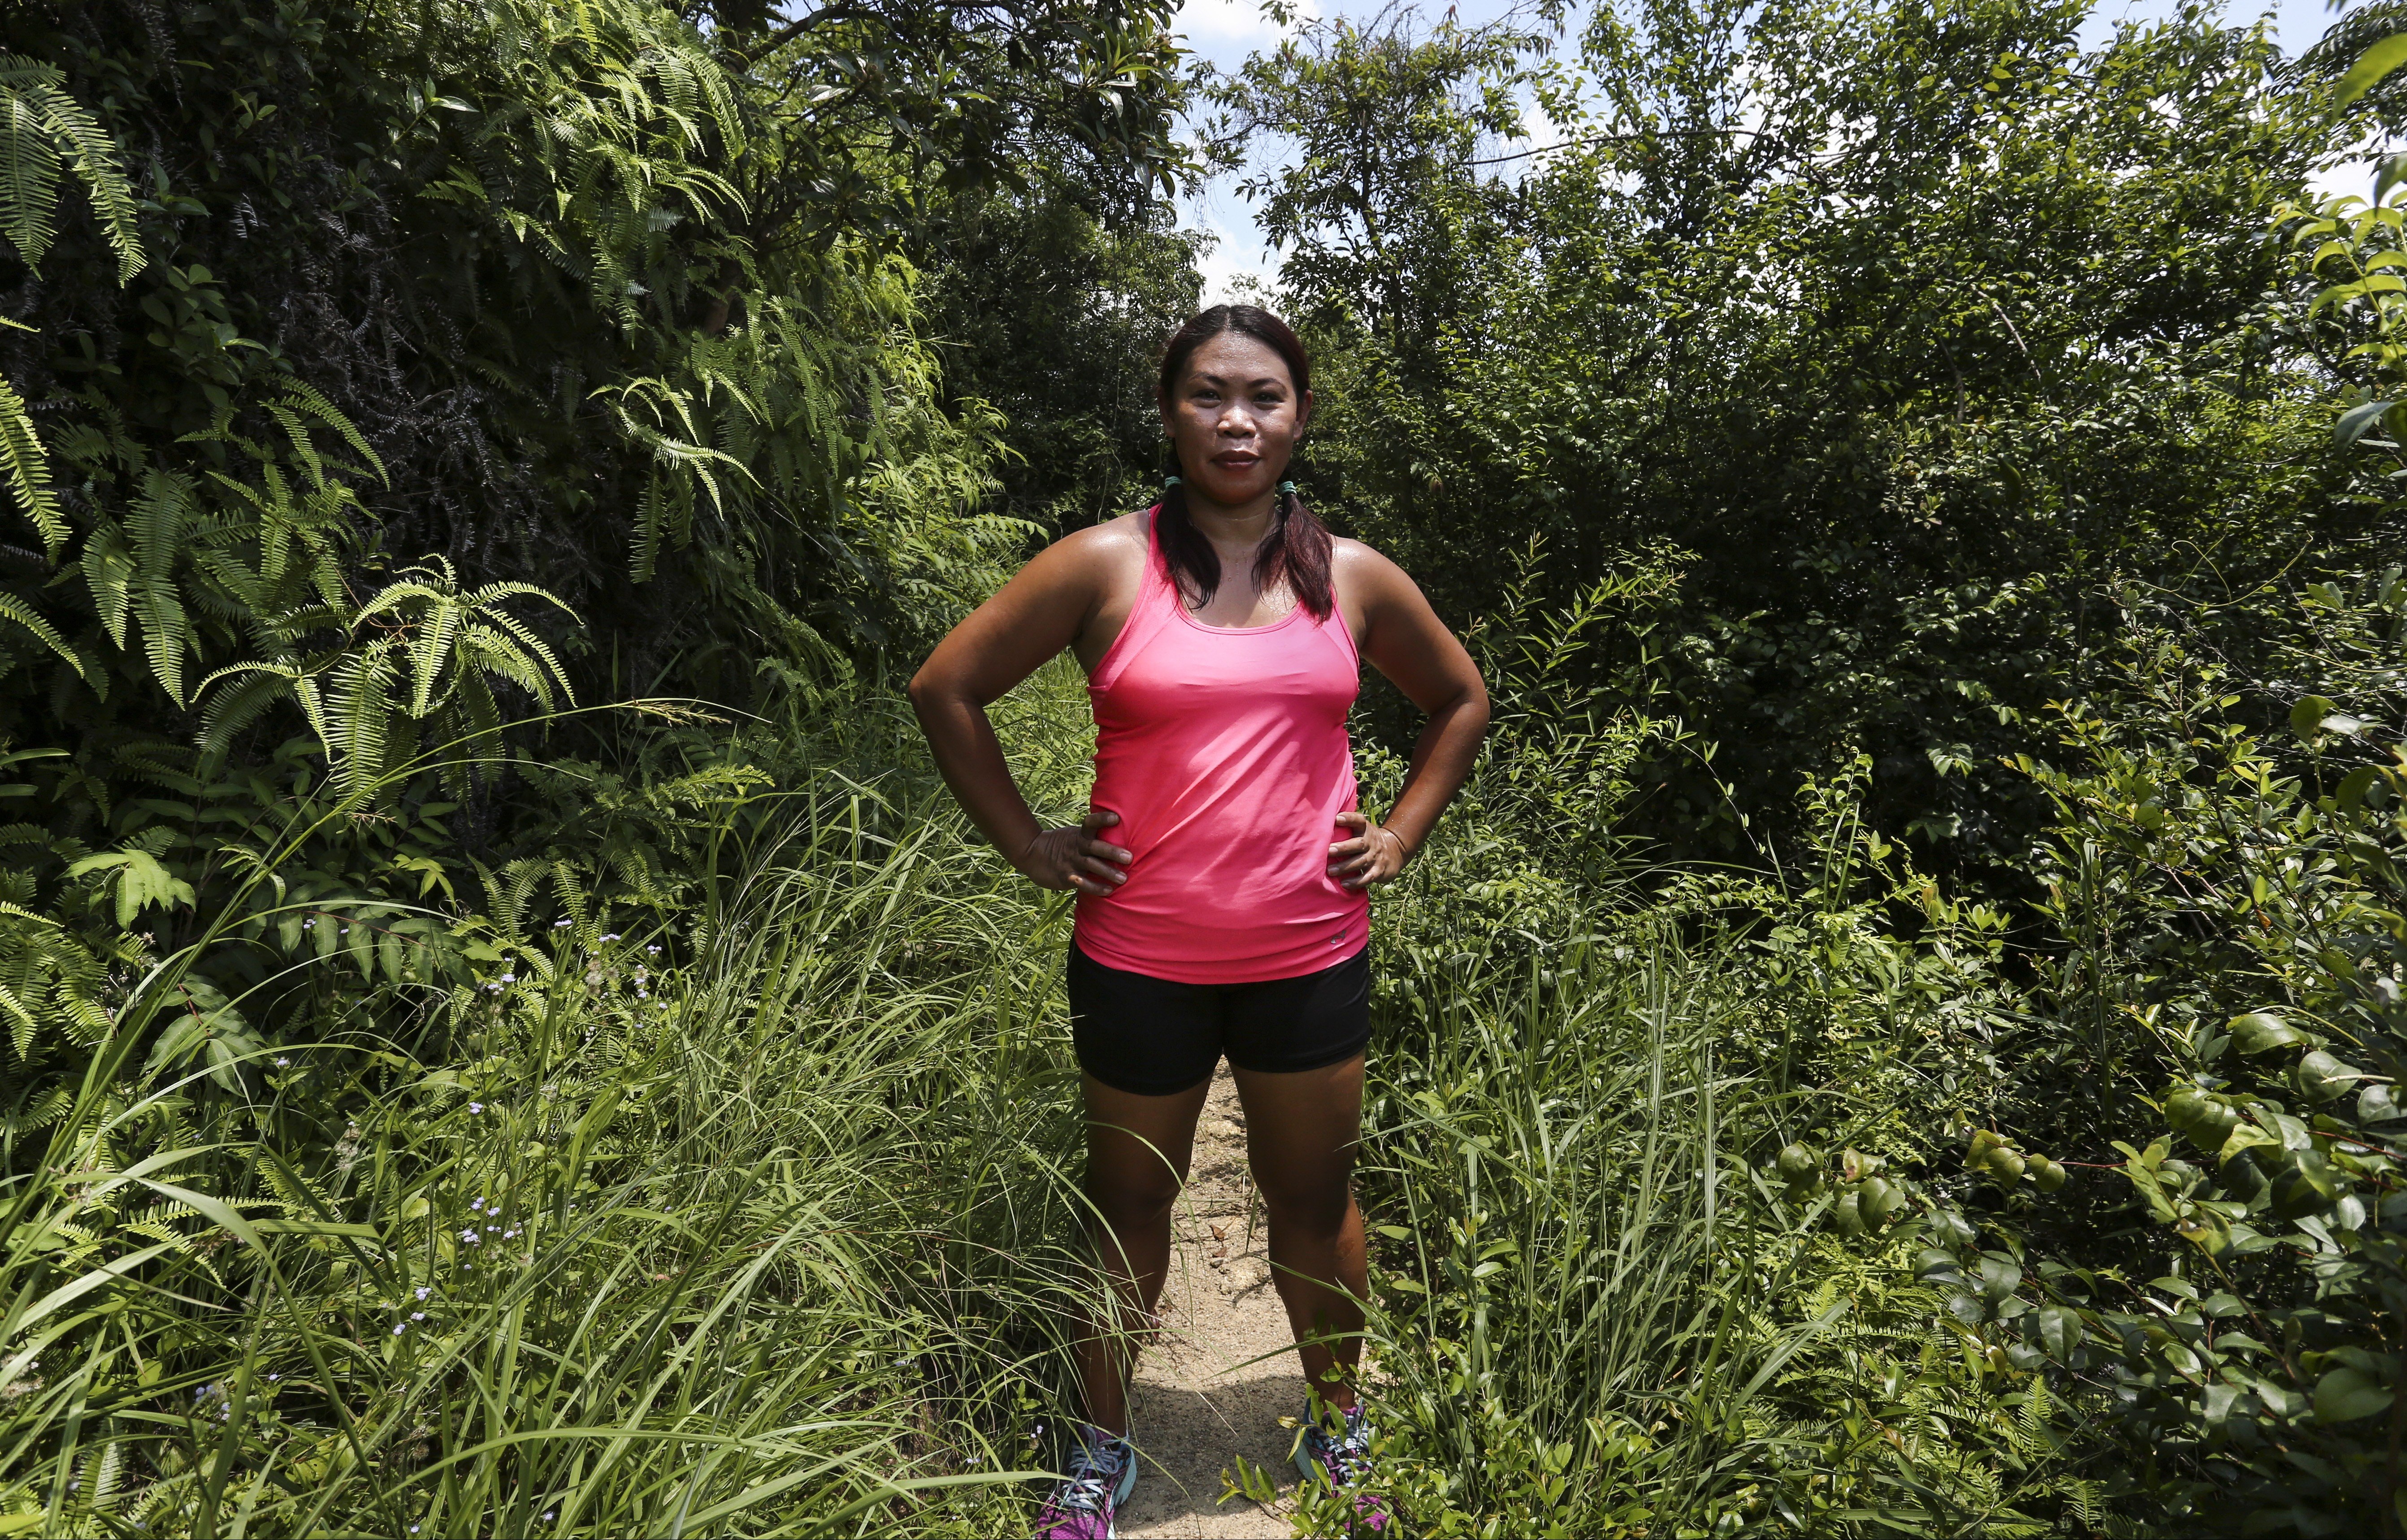 Domestic helper Liza Avelino has worked in Hong Kong for more than two decades, and is a seasoned hiker on the city’s trails. Photo: Jonathan Wong